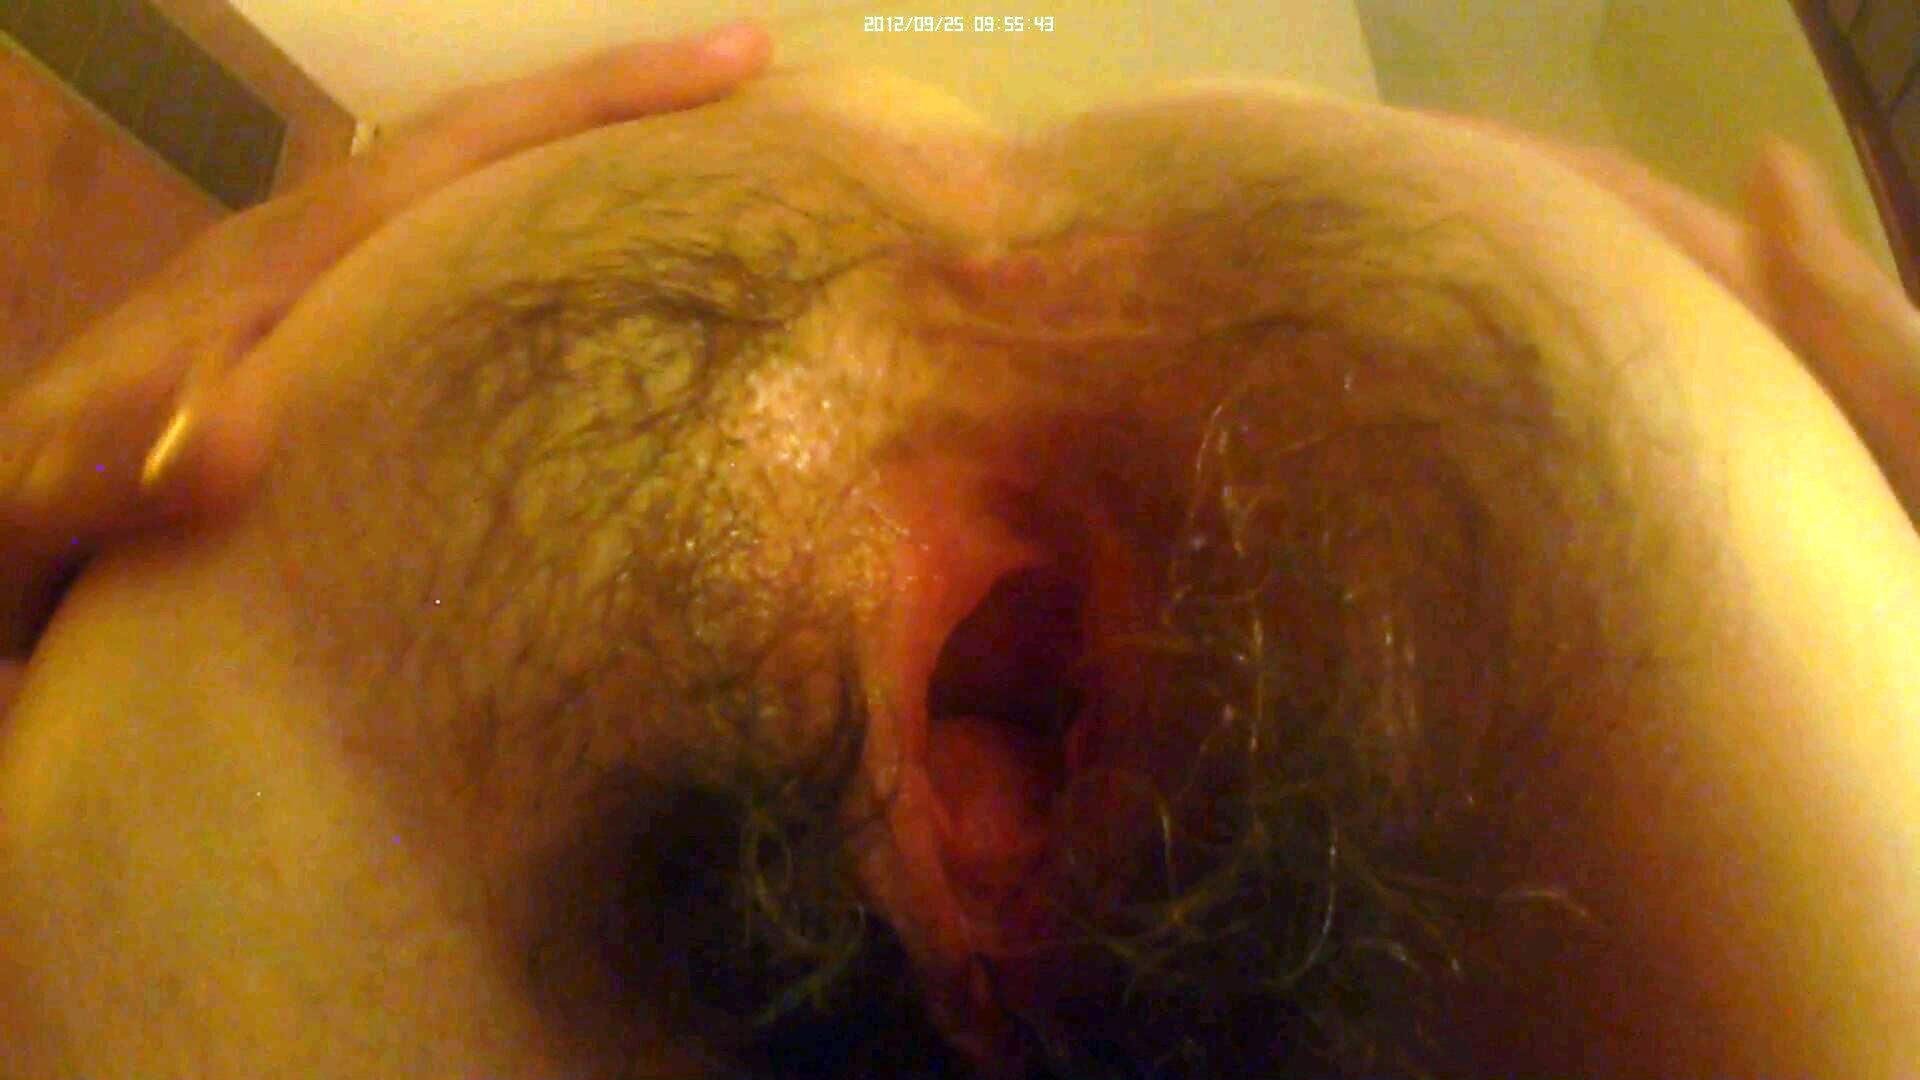 hairy and gaping